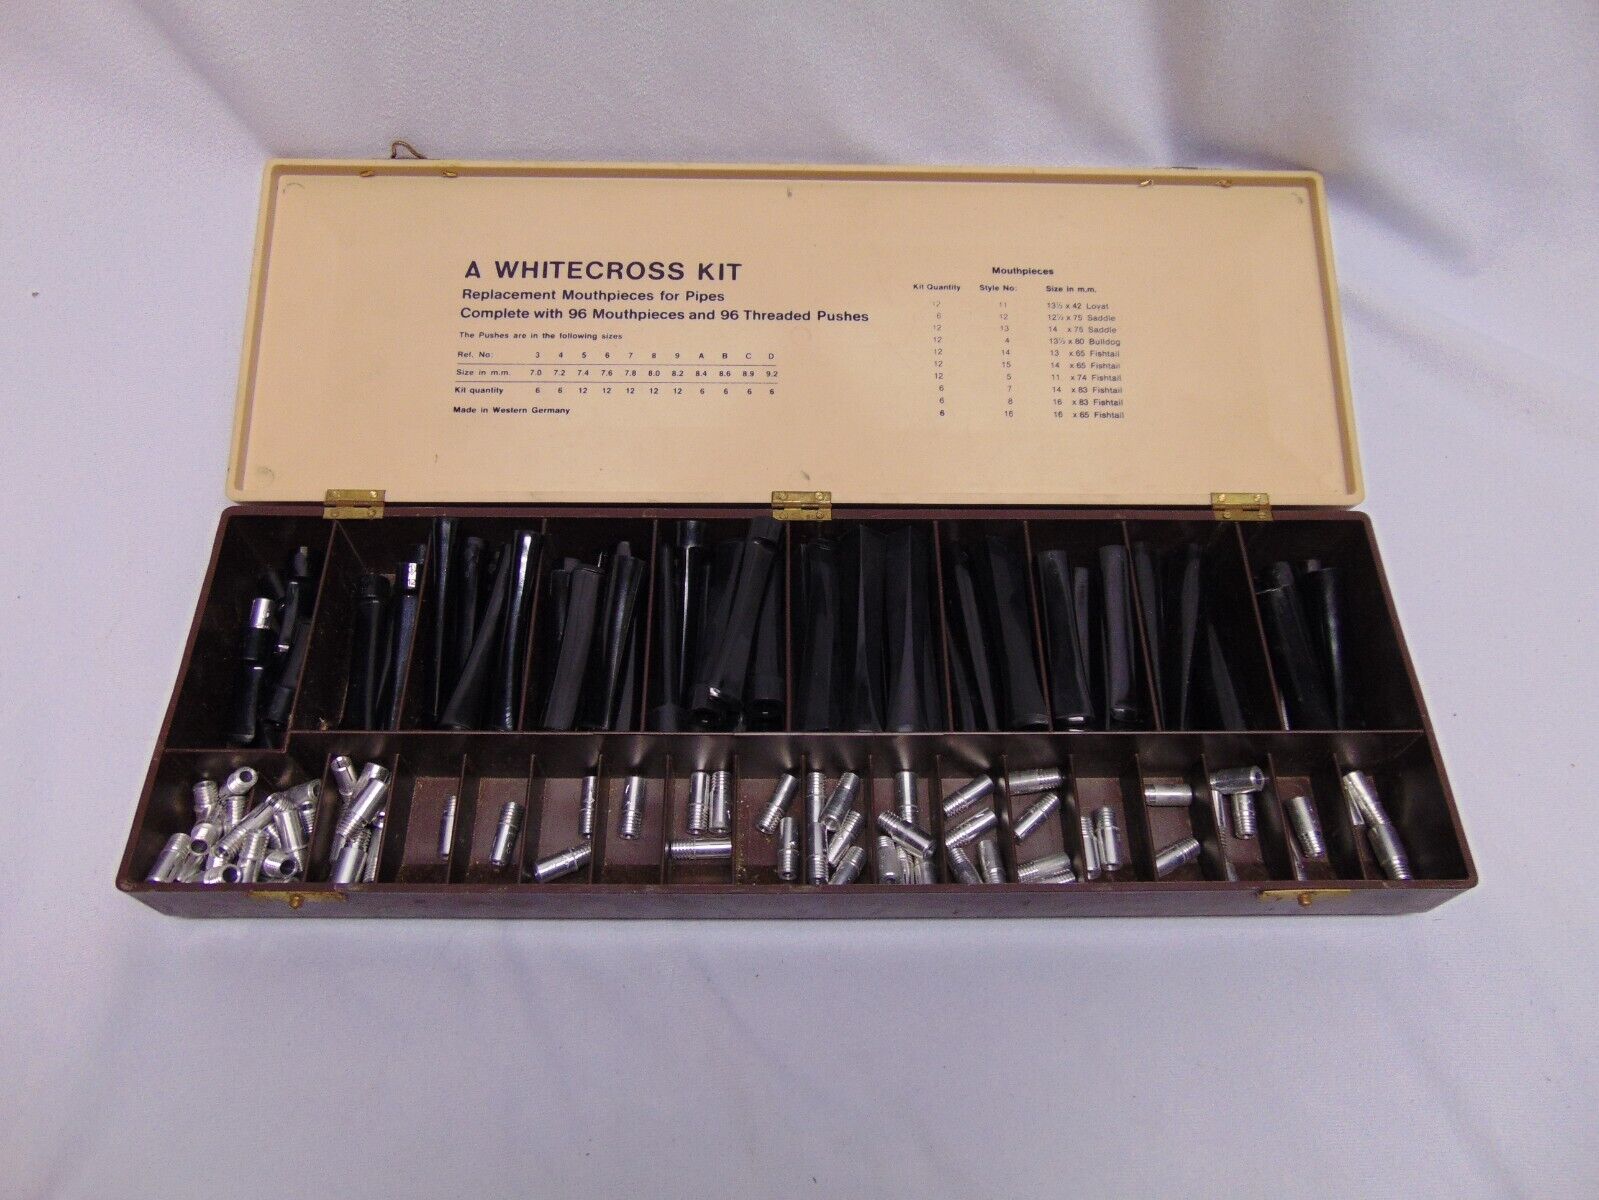 Vintage WhiteCross replacement kit 87 Mouthpieces & 75 Threads for pipes Germany